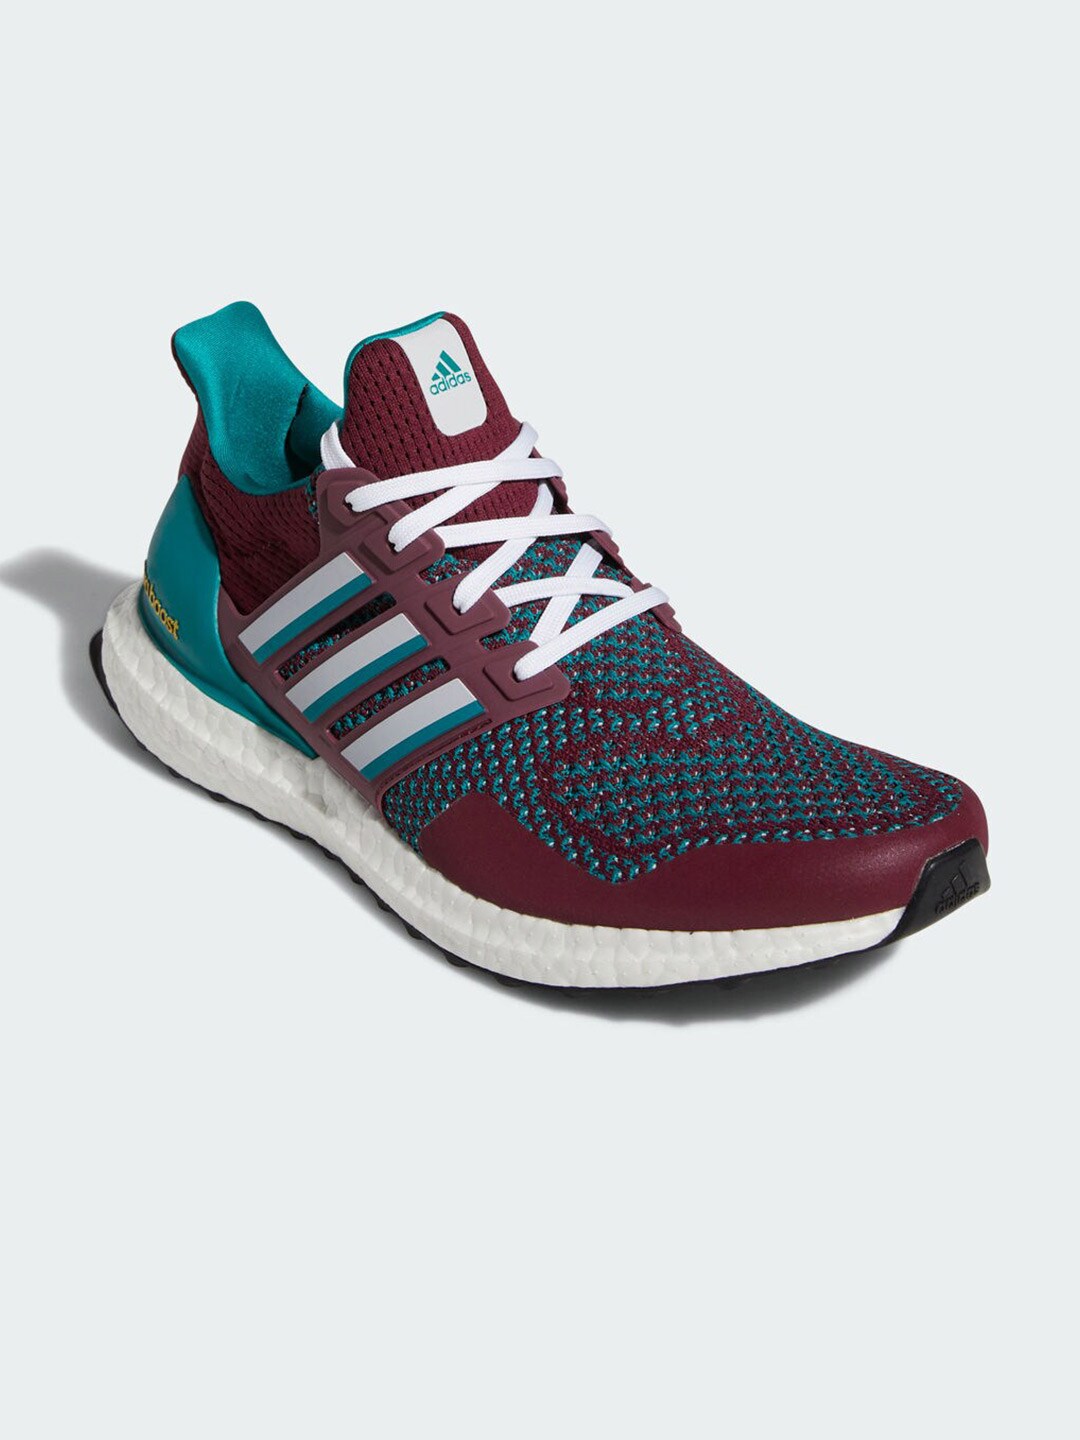 ADIDAS ULTRABOOST 1.0 x JESSE HALL Self Design Running Sports Shoes Price in India